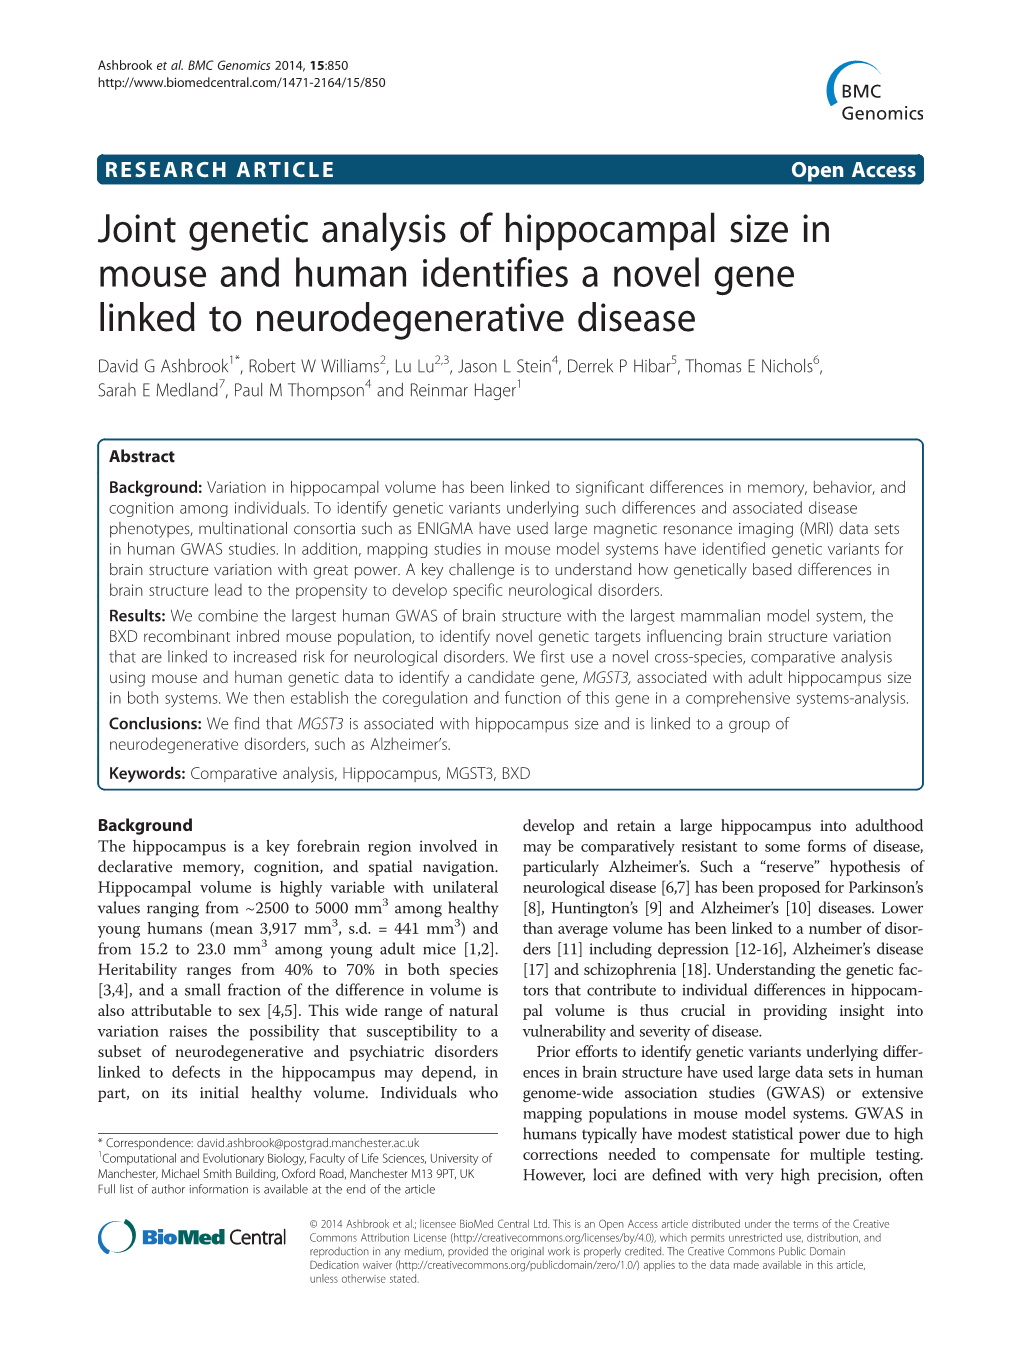 Joint Genetic Analysis of Hippocampal Size in Mouse and Human Identifies